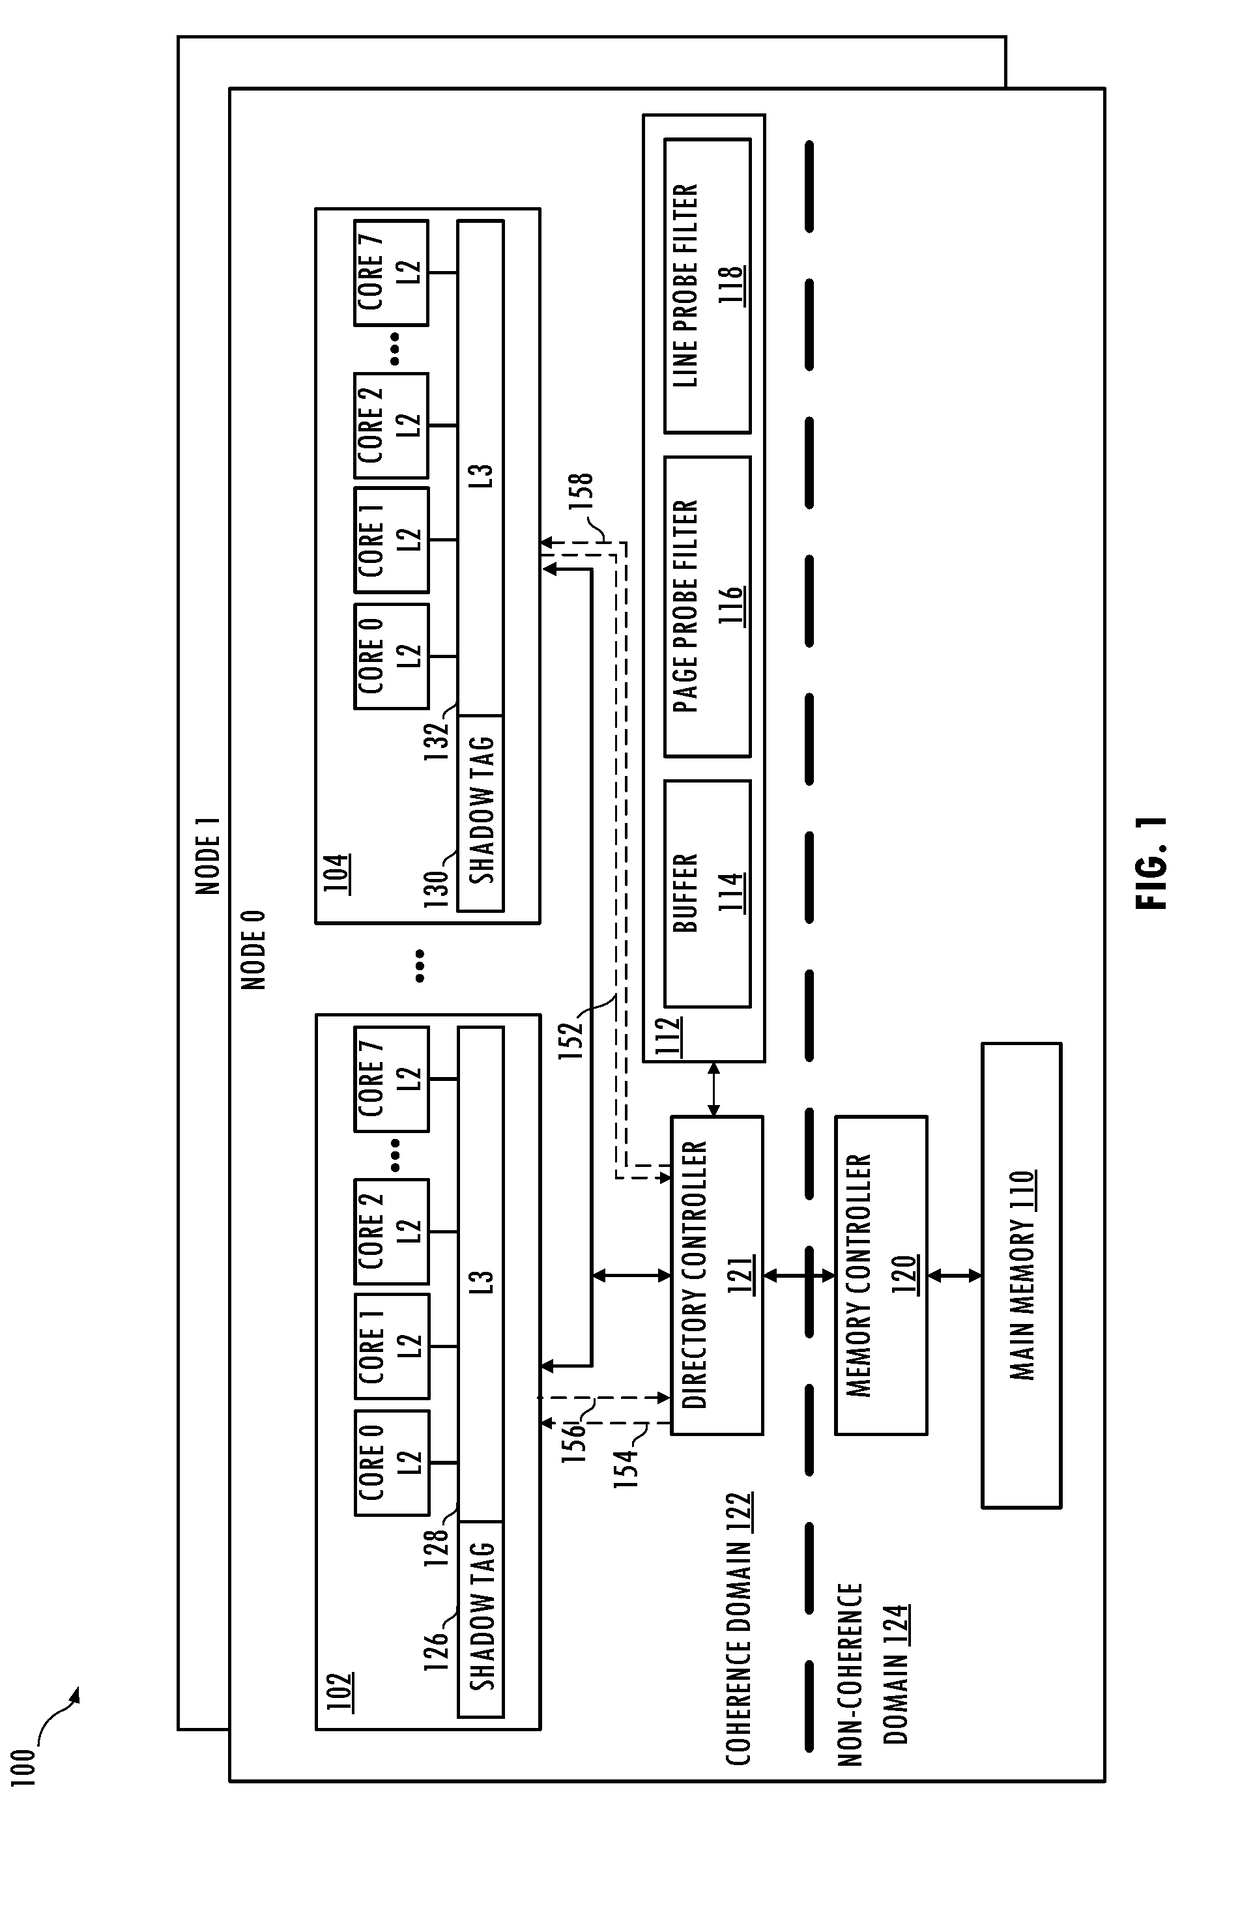 Acceleration of cache-to-cache data transfers for producer-consumer communication